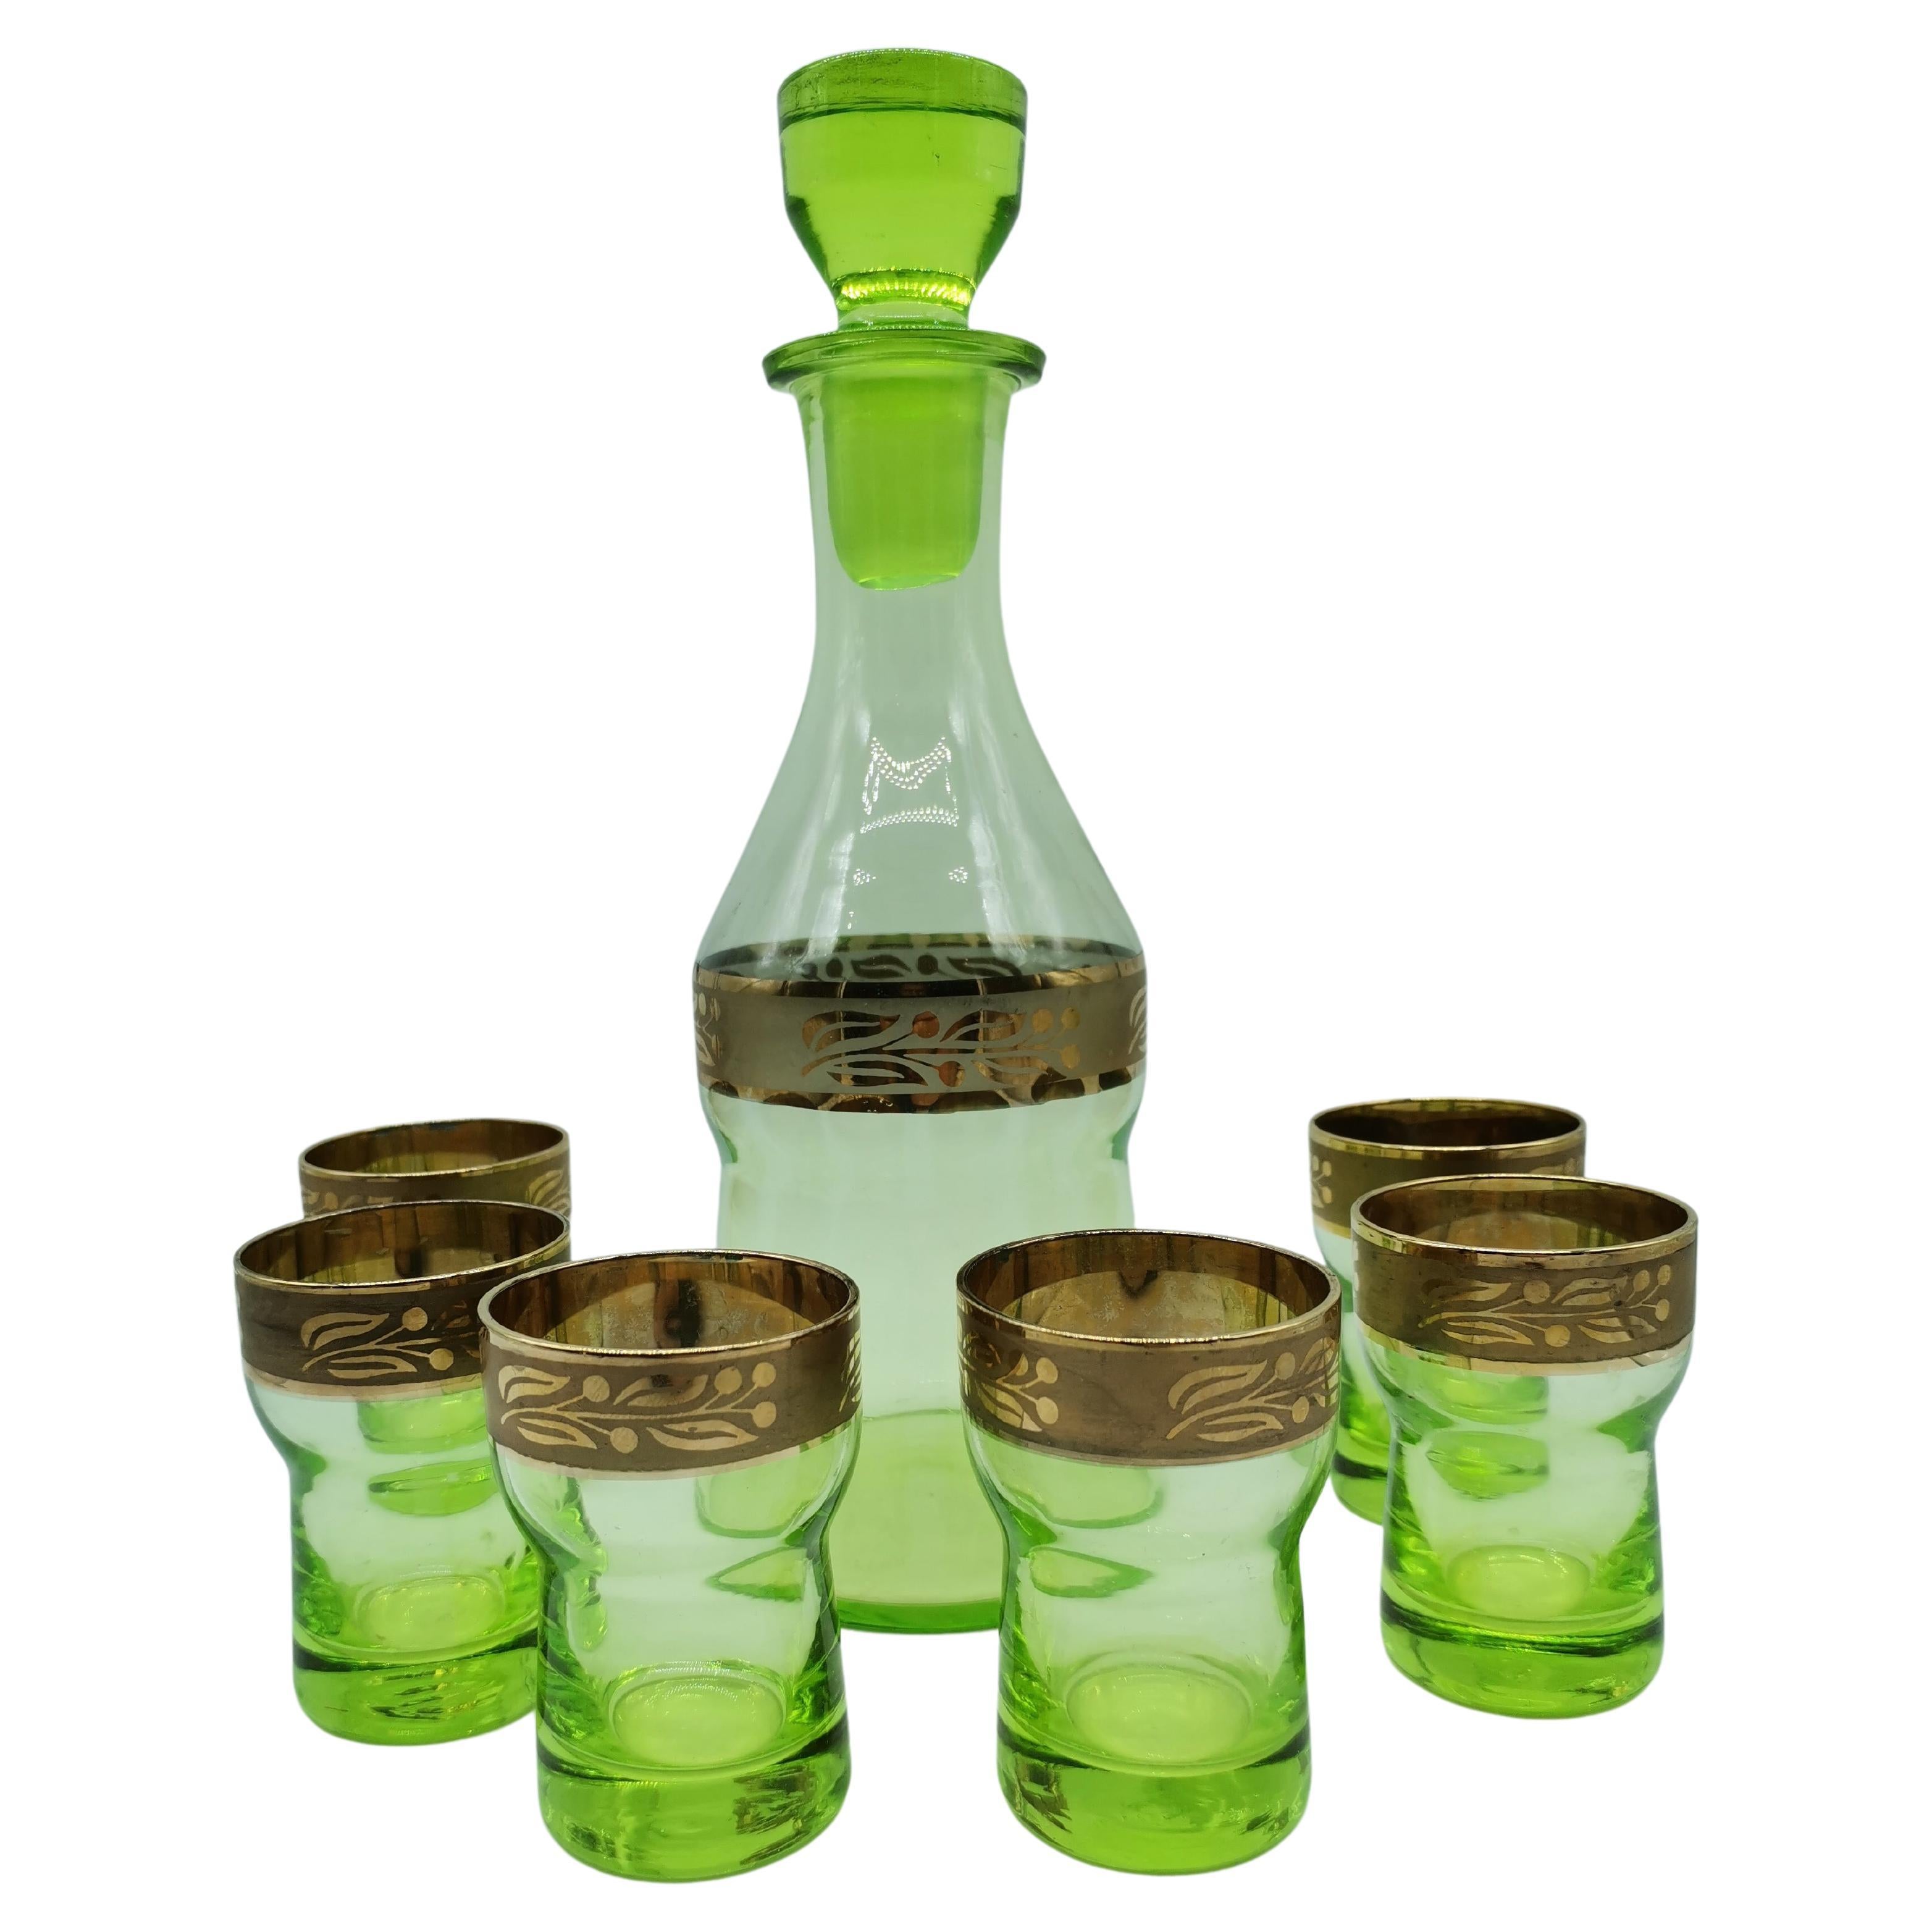 7 Pcs, Small Glasses and a Carafe, Glass